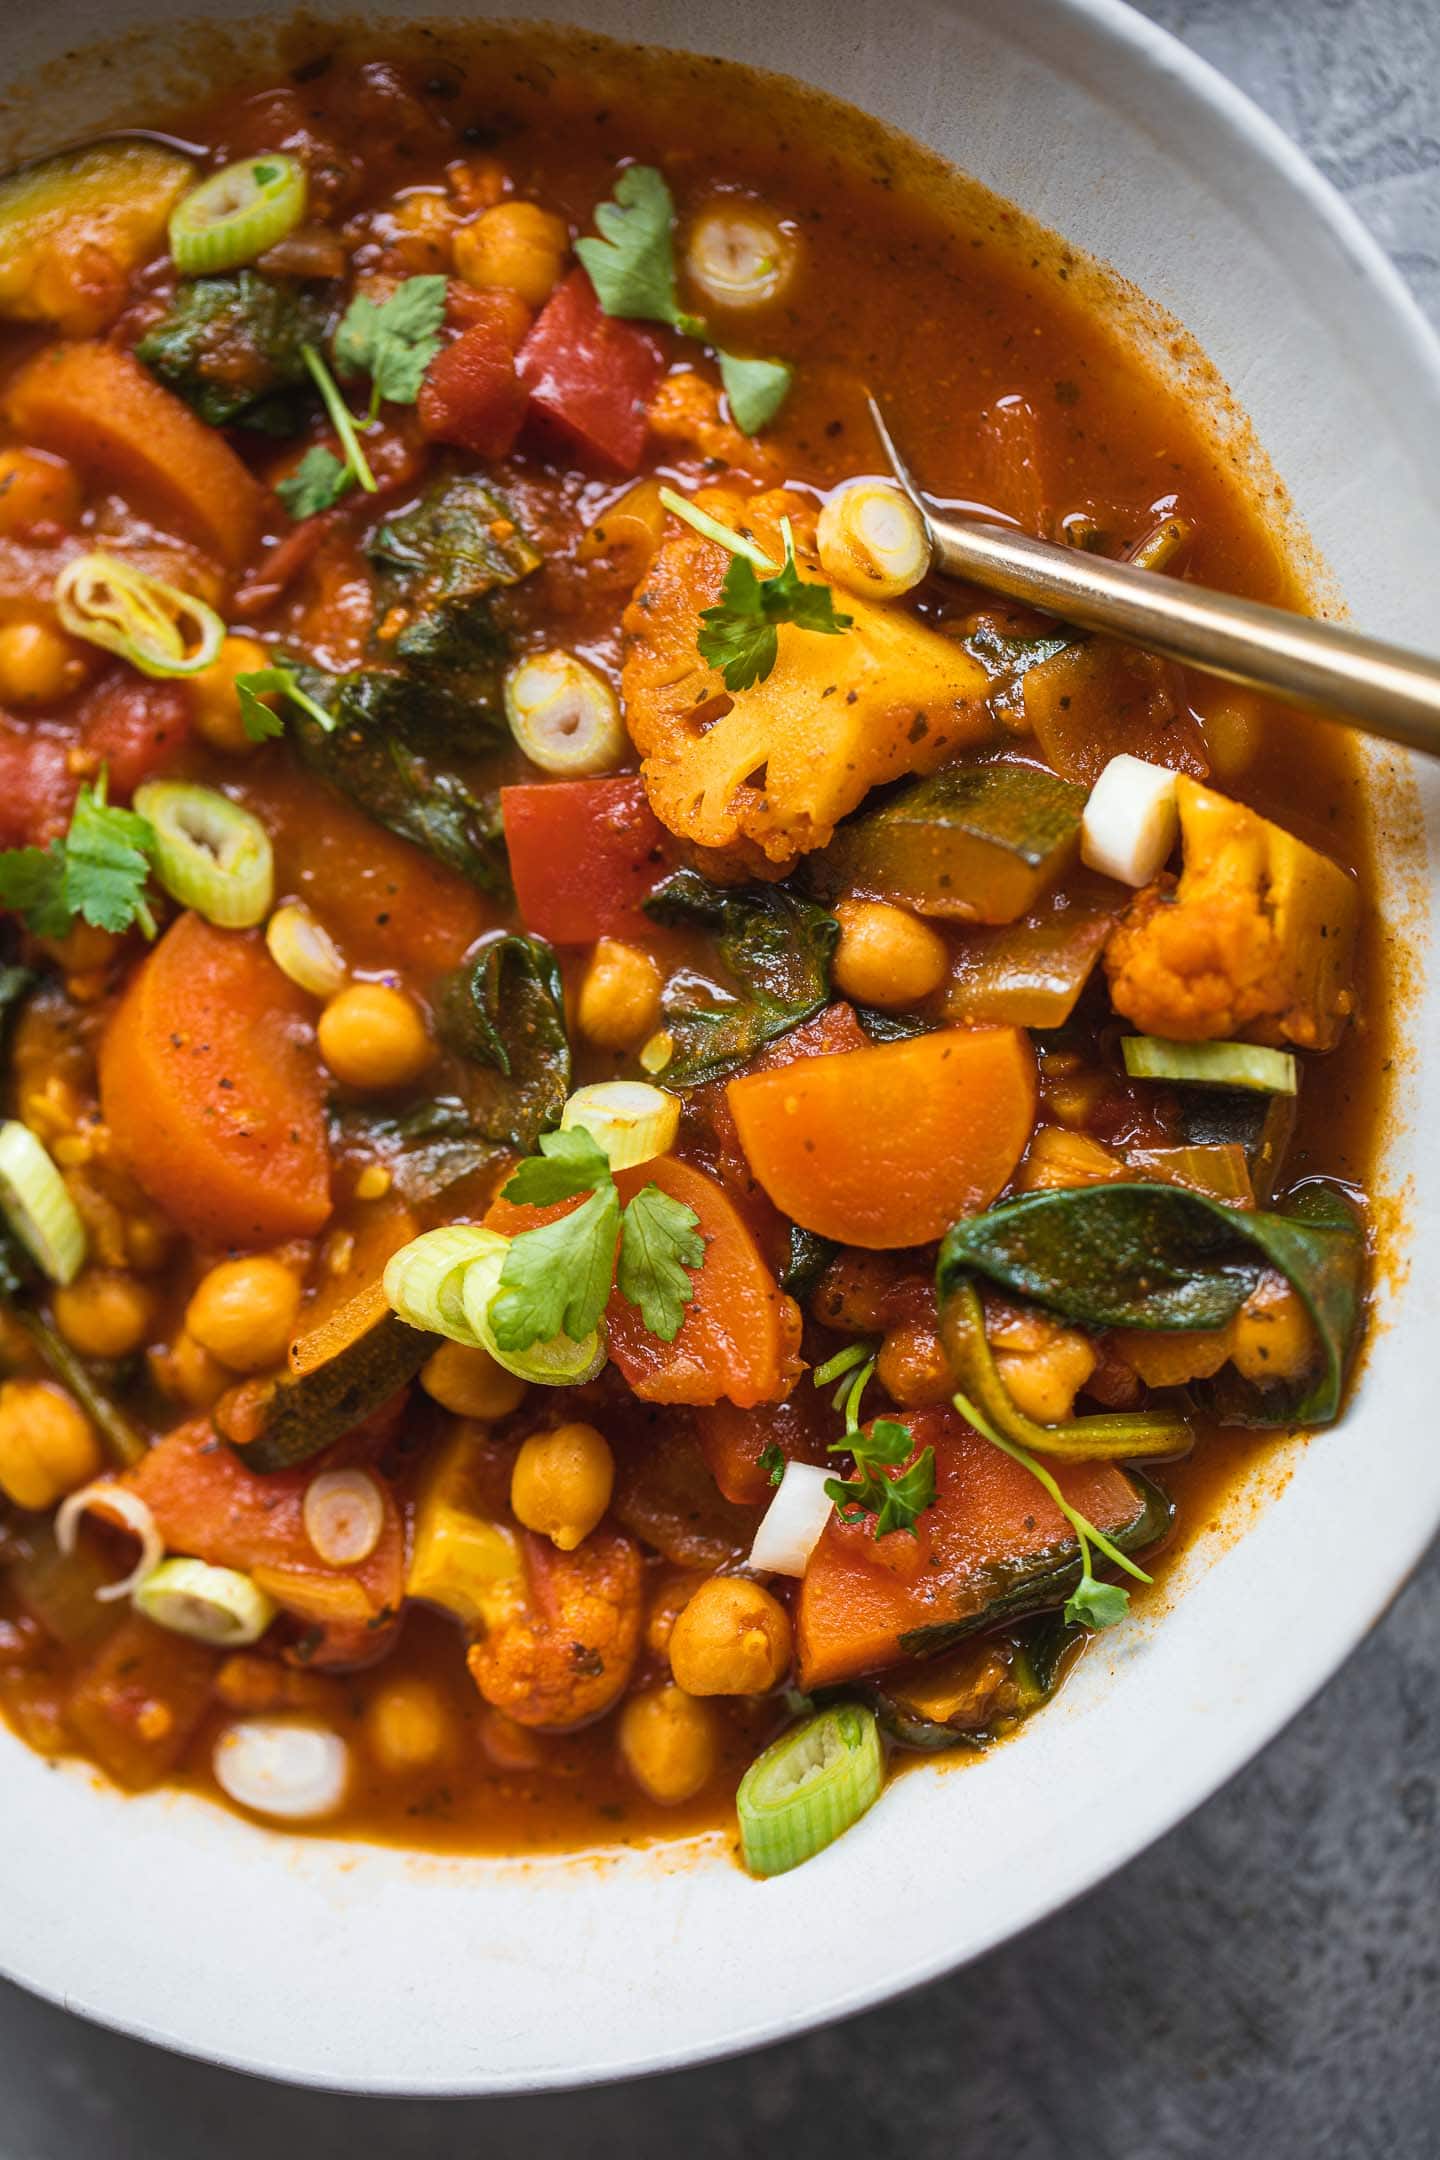 Chickpea stew with vegetables and spinach